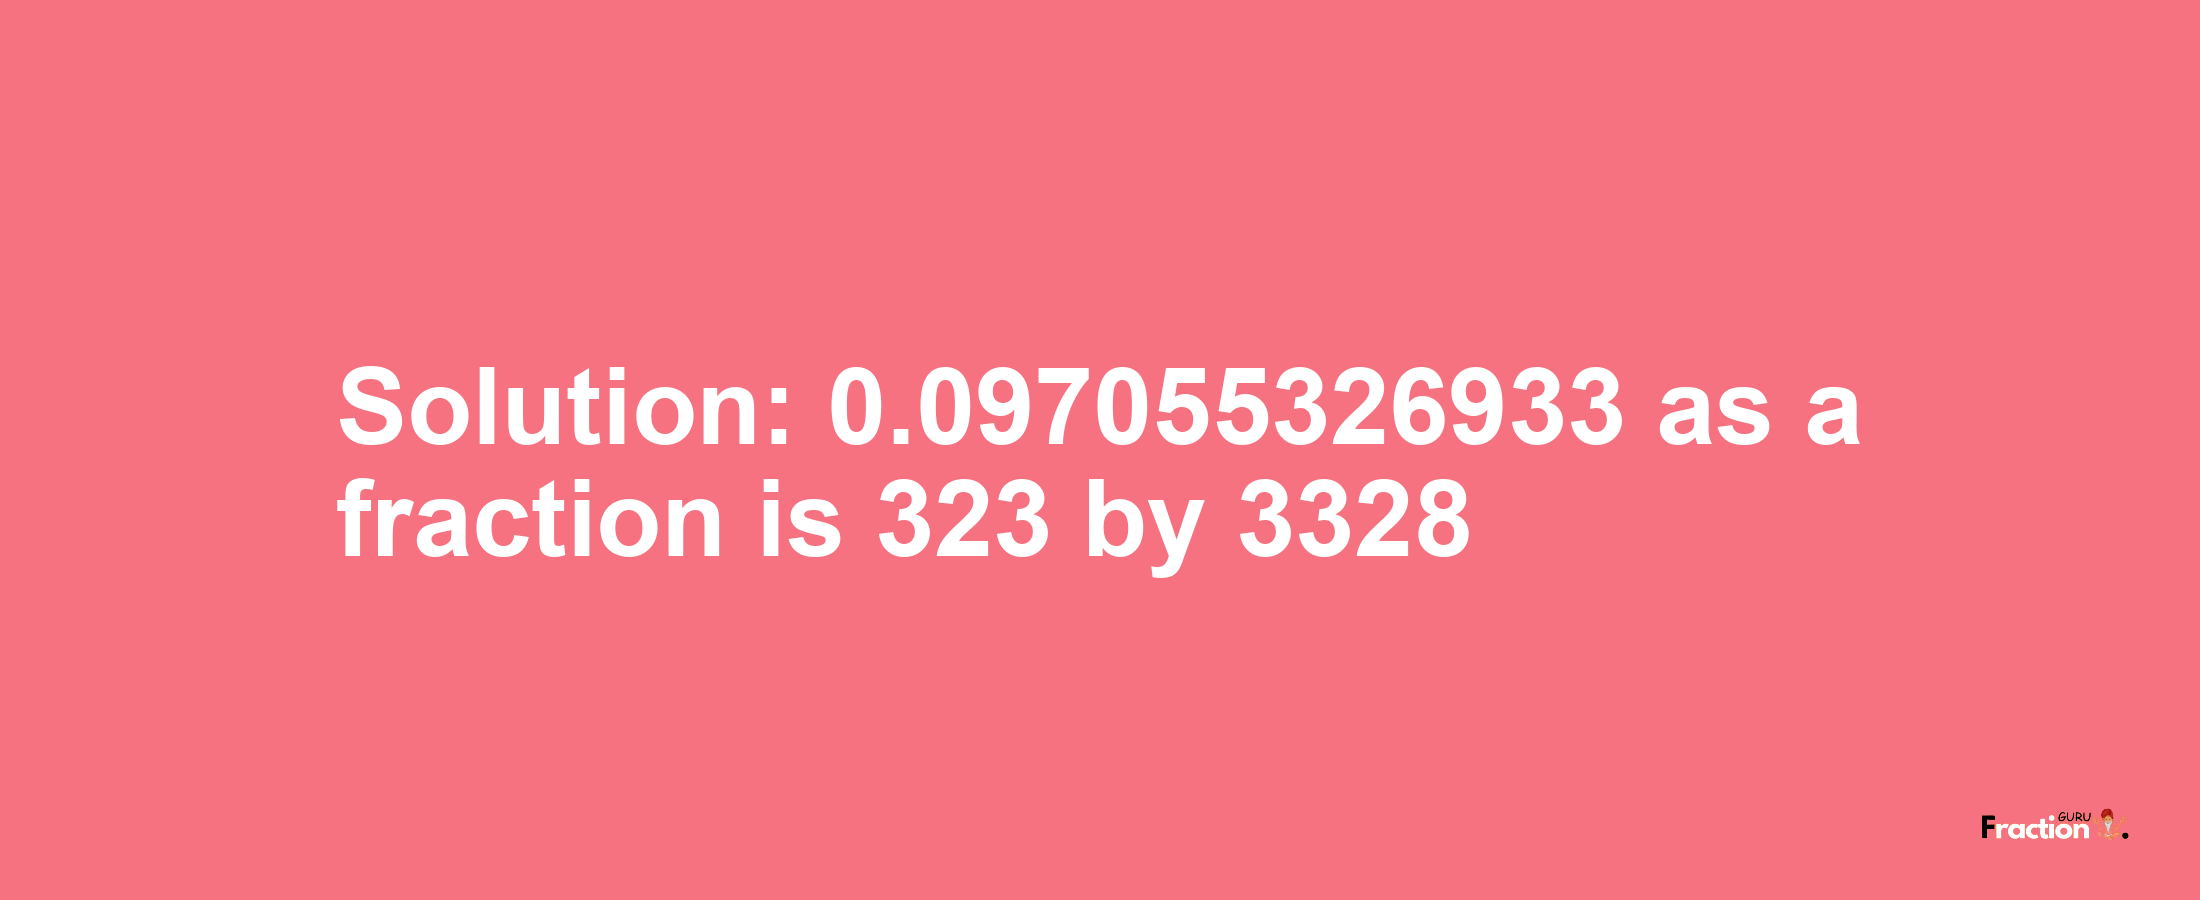 Solution:0.097055326933 as a fraction is 323/3328